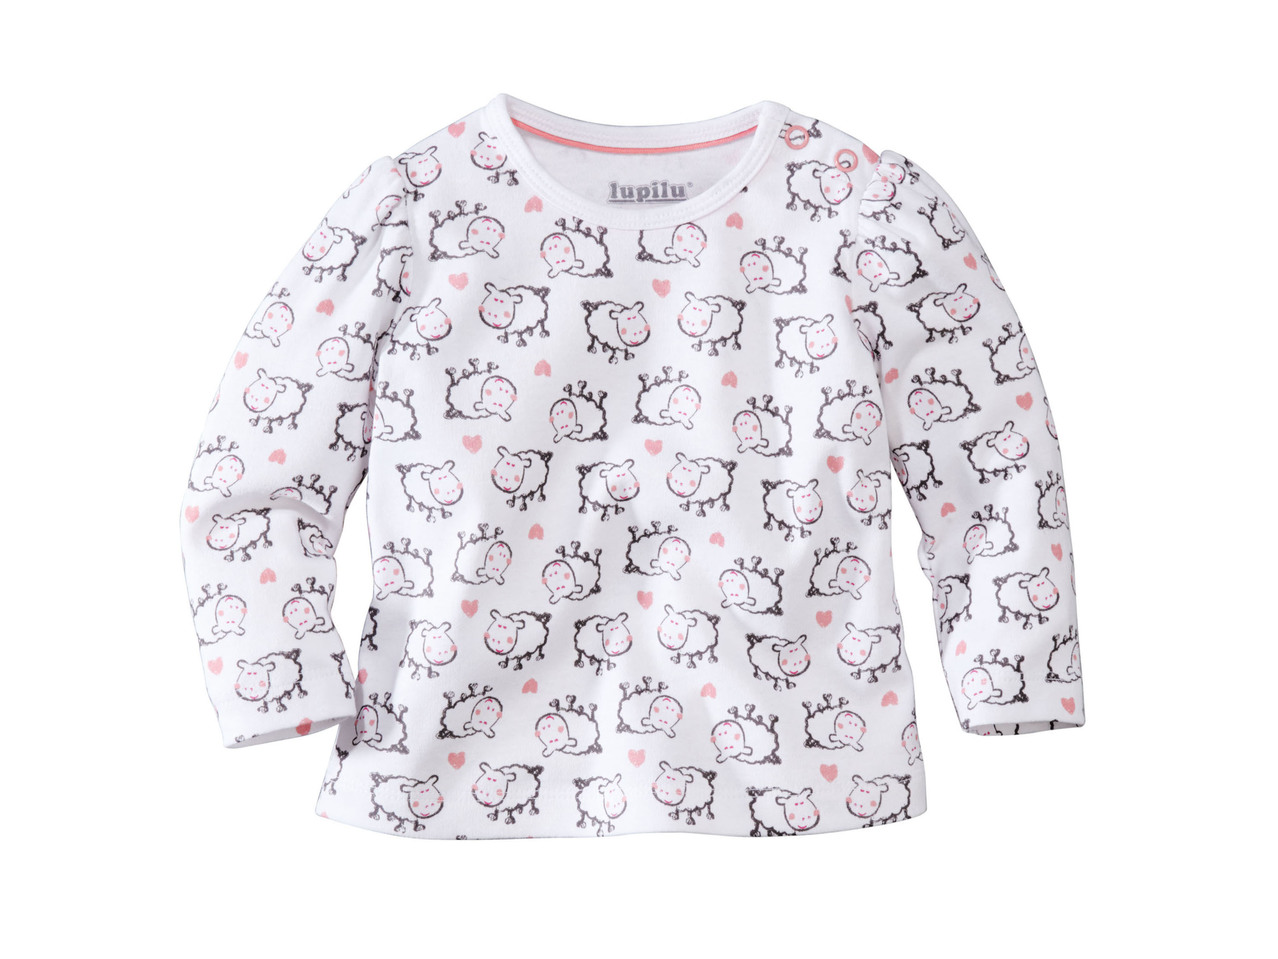 Girls' Long-Sleeved Baby Top, 2 pieces